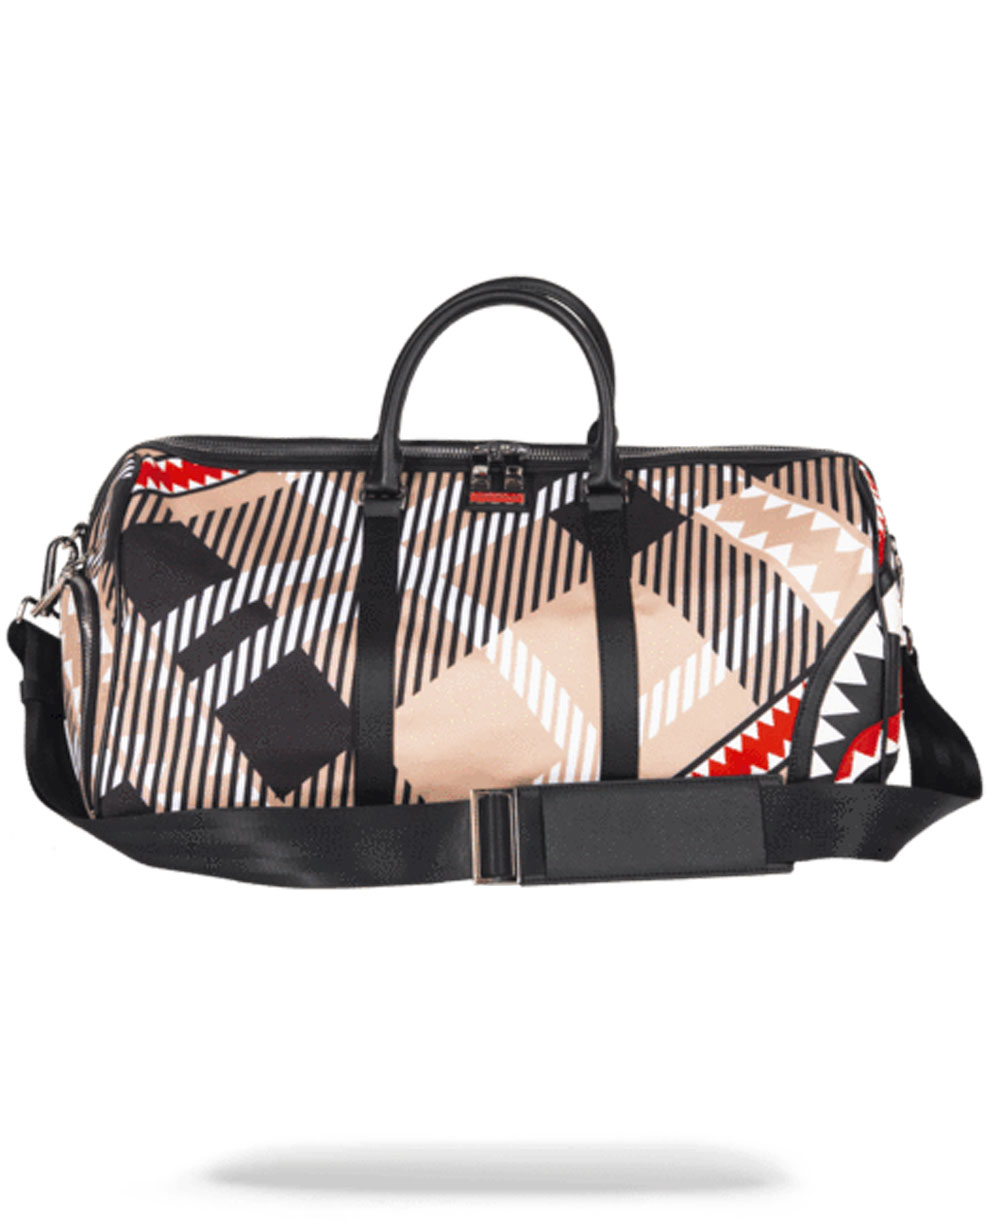 Luggage & Travel bags Sprayground - Small travel bag in black and